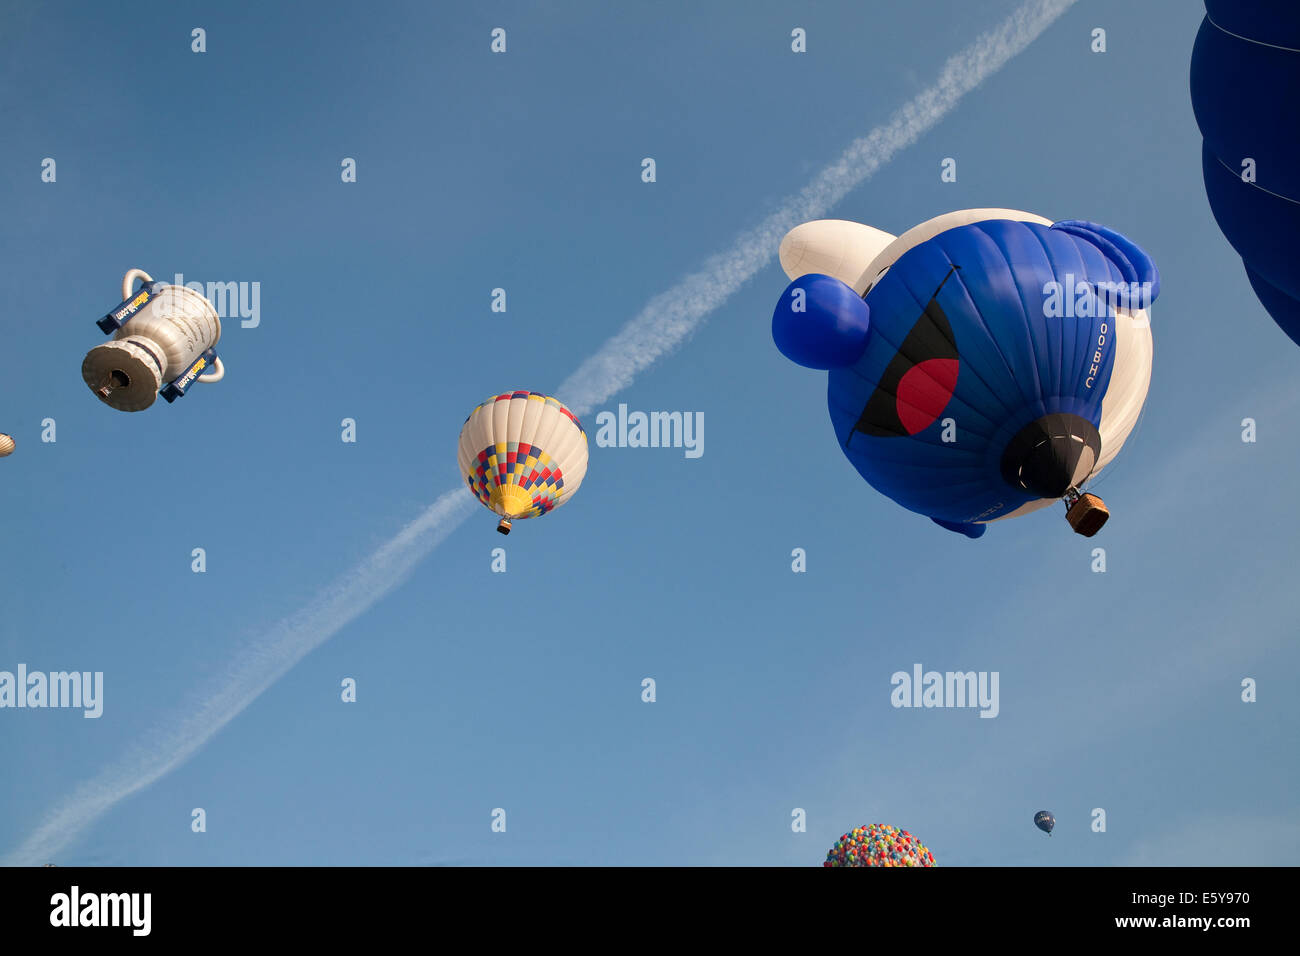 Bristol, UK. 8th August, 2014. Shapes Balloons lift off during the Bristol International Balloon Fiesta Credit: Keith Larby/Alamy Live News Stock Photo